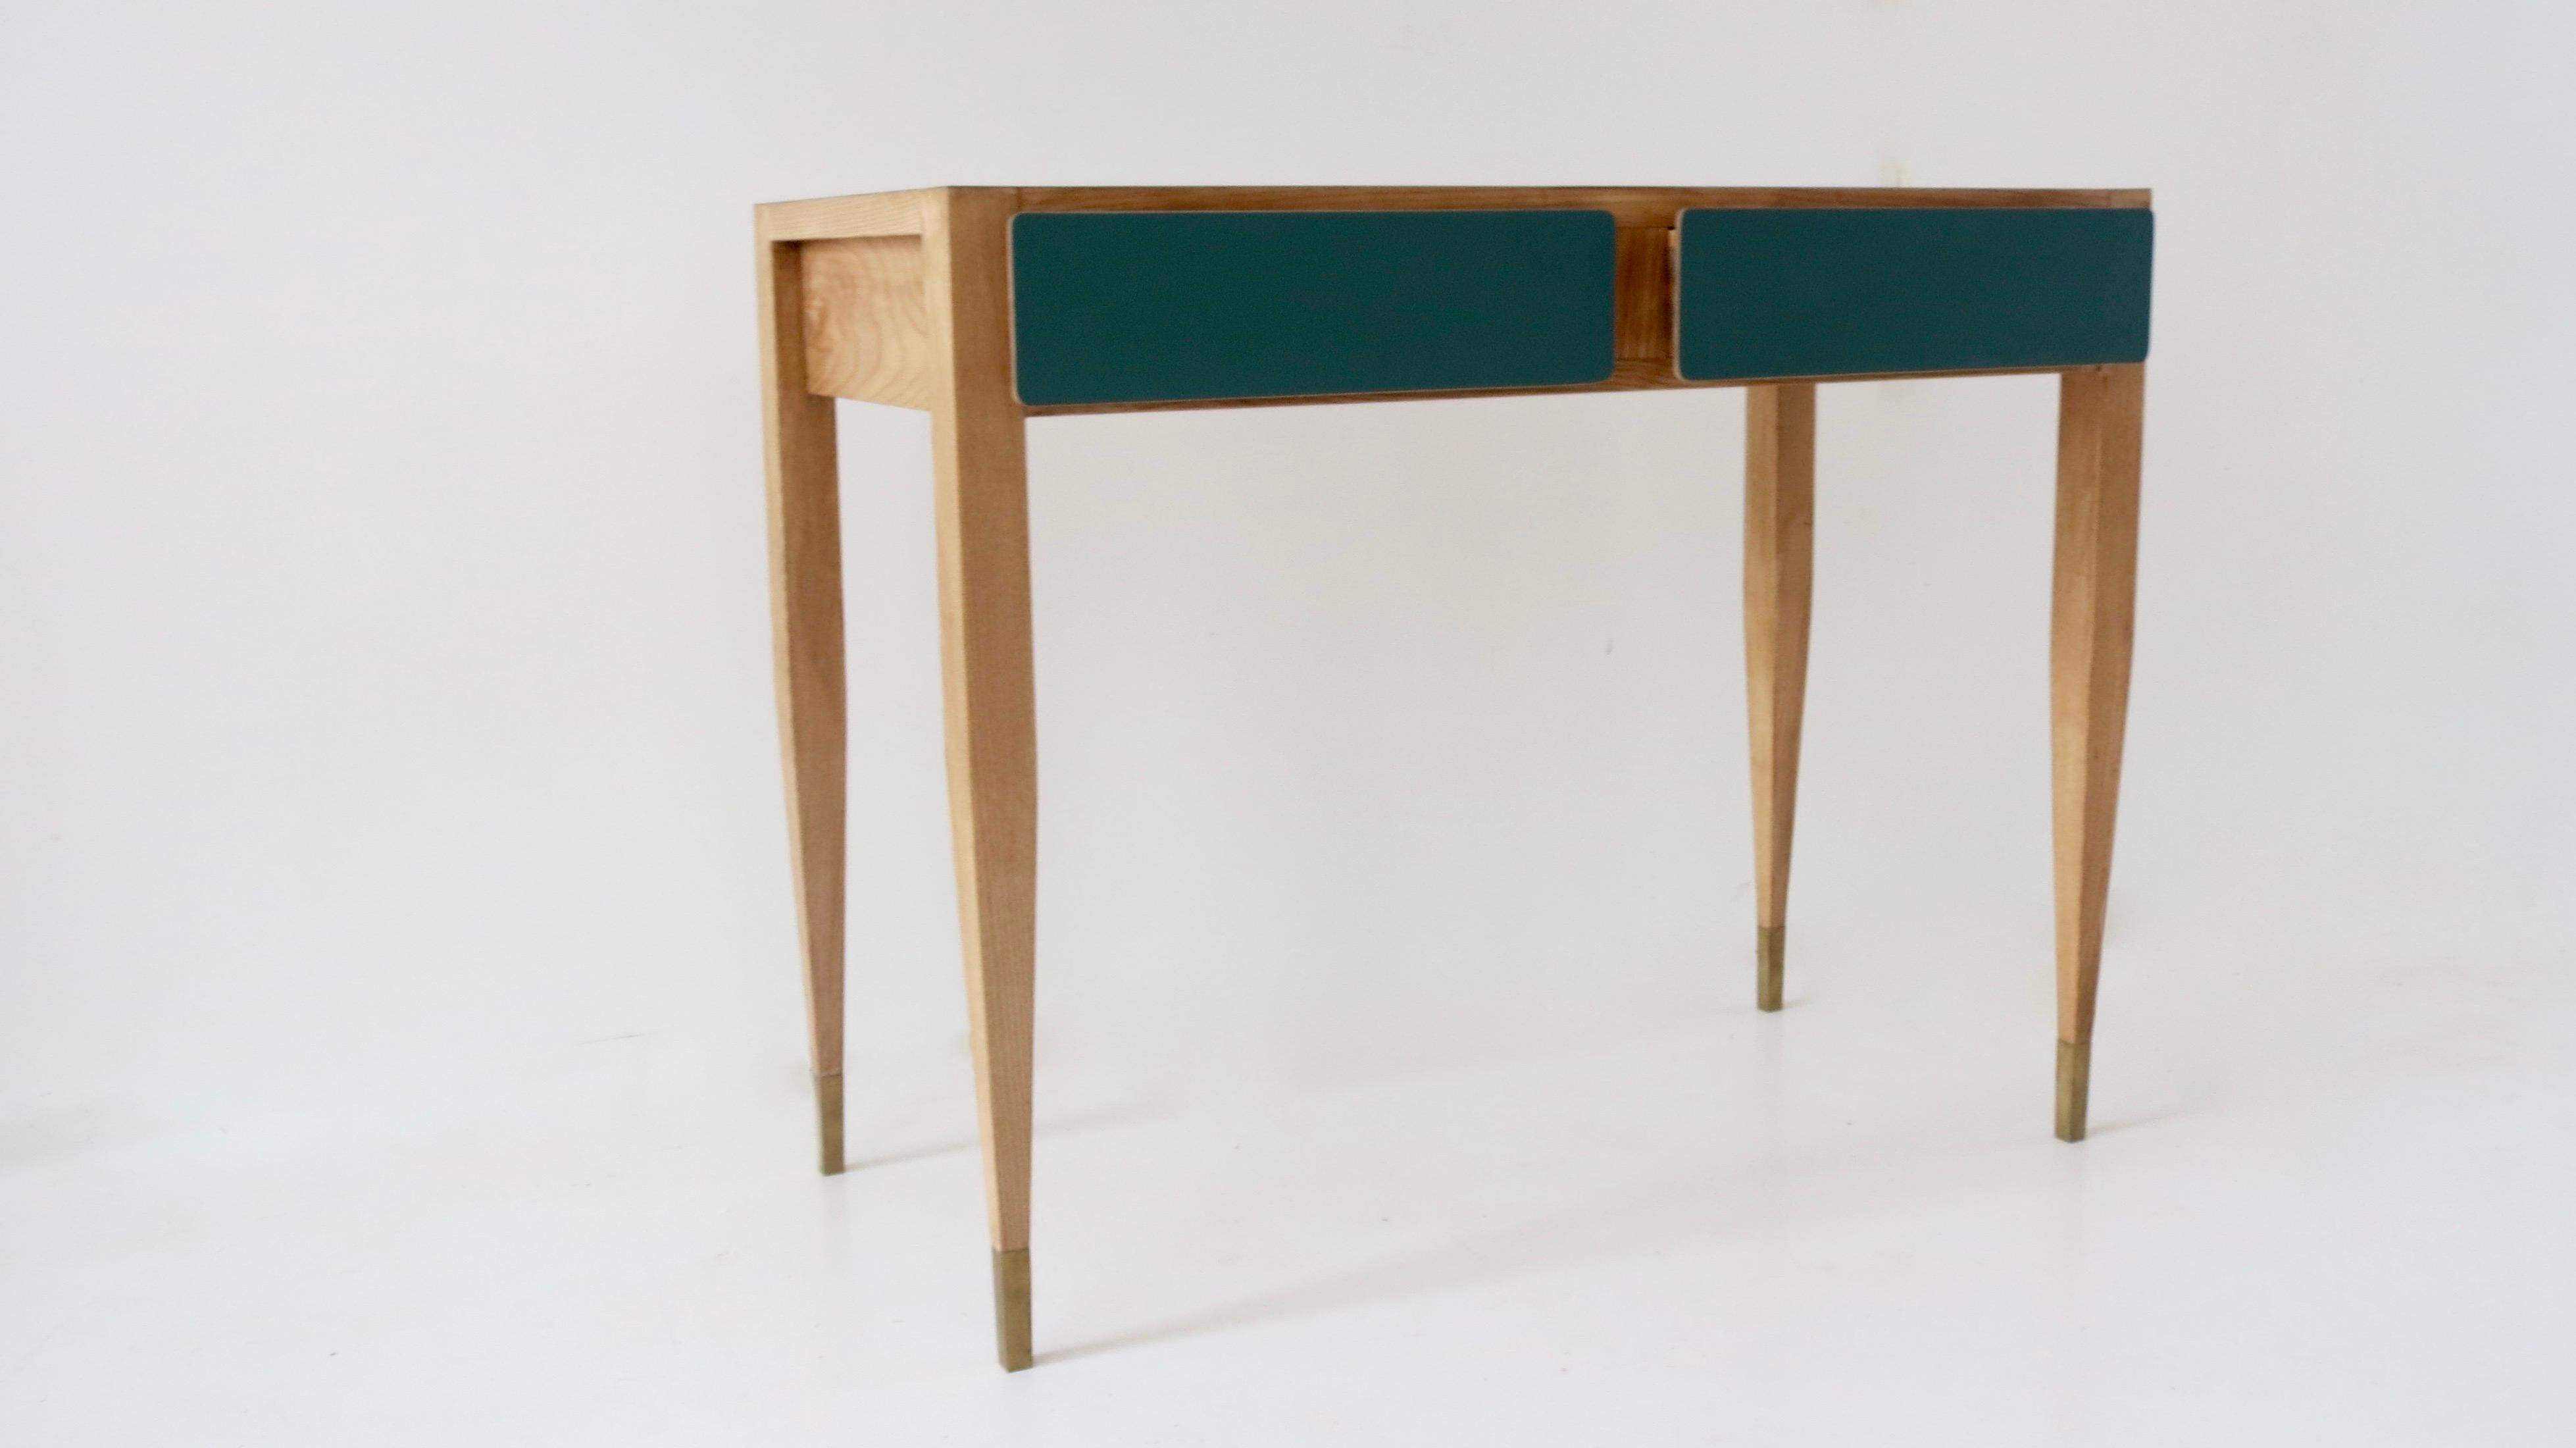 Rare vanity dressing table designed by Gio Ponti for the rooms of the Hotel Parco dei Principi in Roma
manufactured by Giordano Chiesa, 1964
two drawers
ash, laminate, nickel-plated brass- sold without the table mirror on top